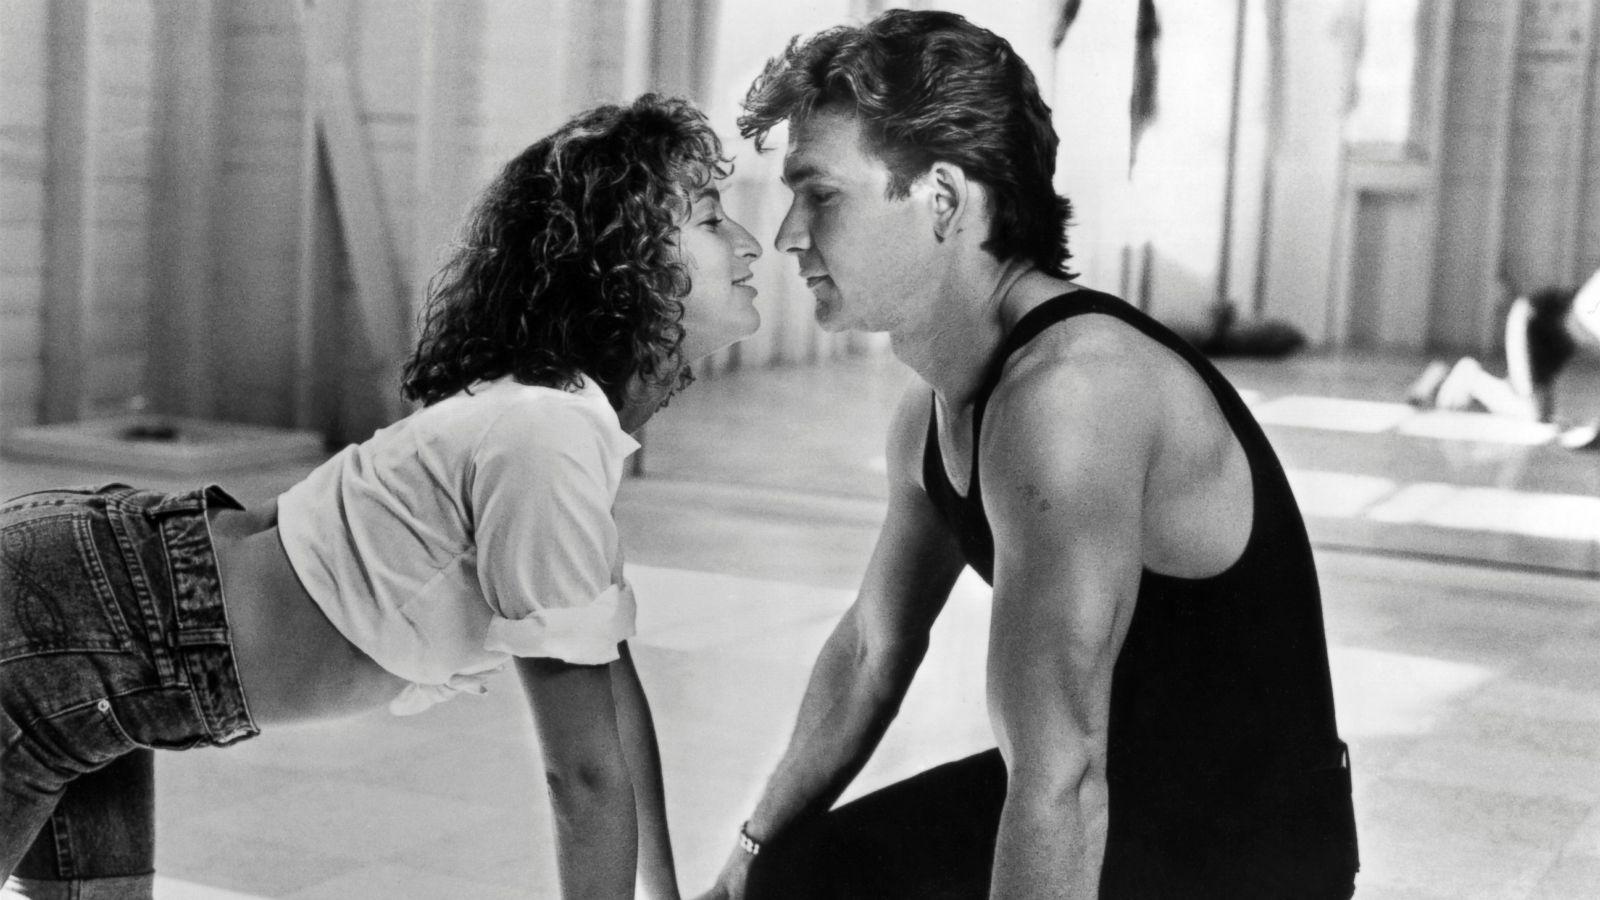 Dirty Dancing' Fans Can Stay in Resort Where Baby Was 'Put in